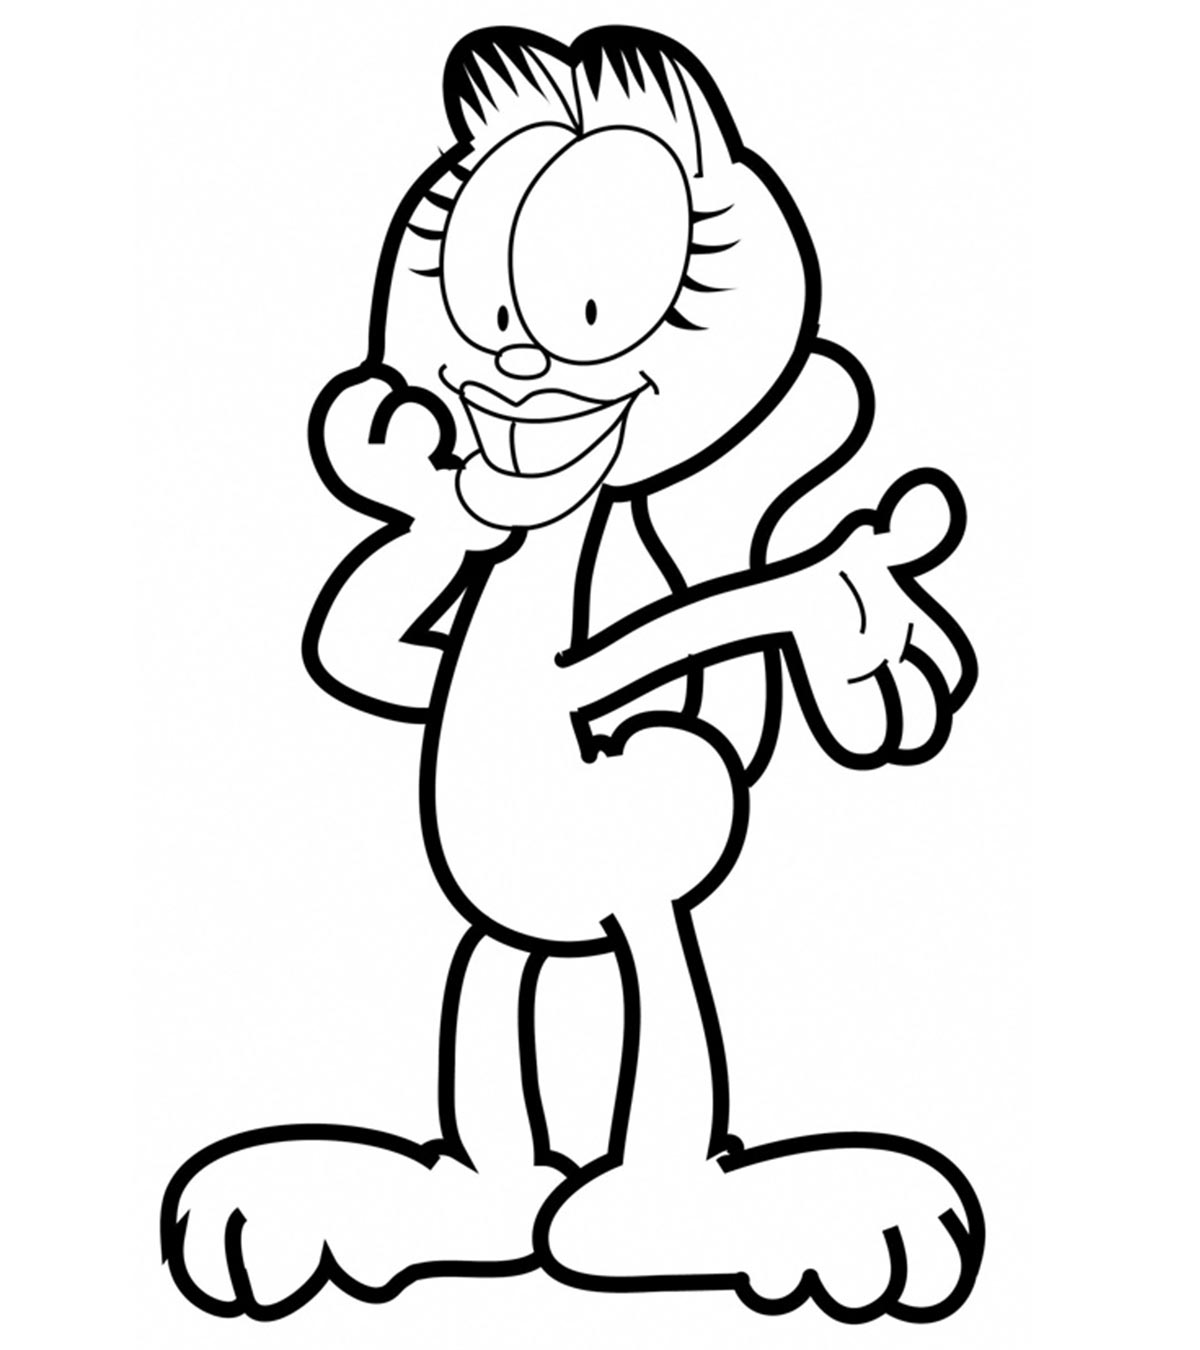 Top 10 Garfield Coloring Pages For Your Toddler